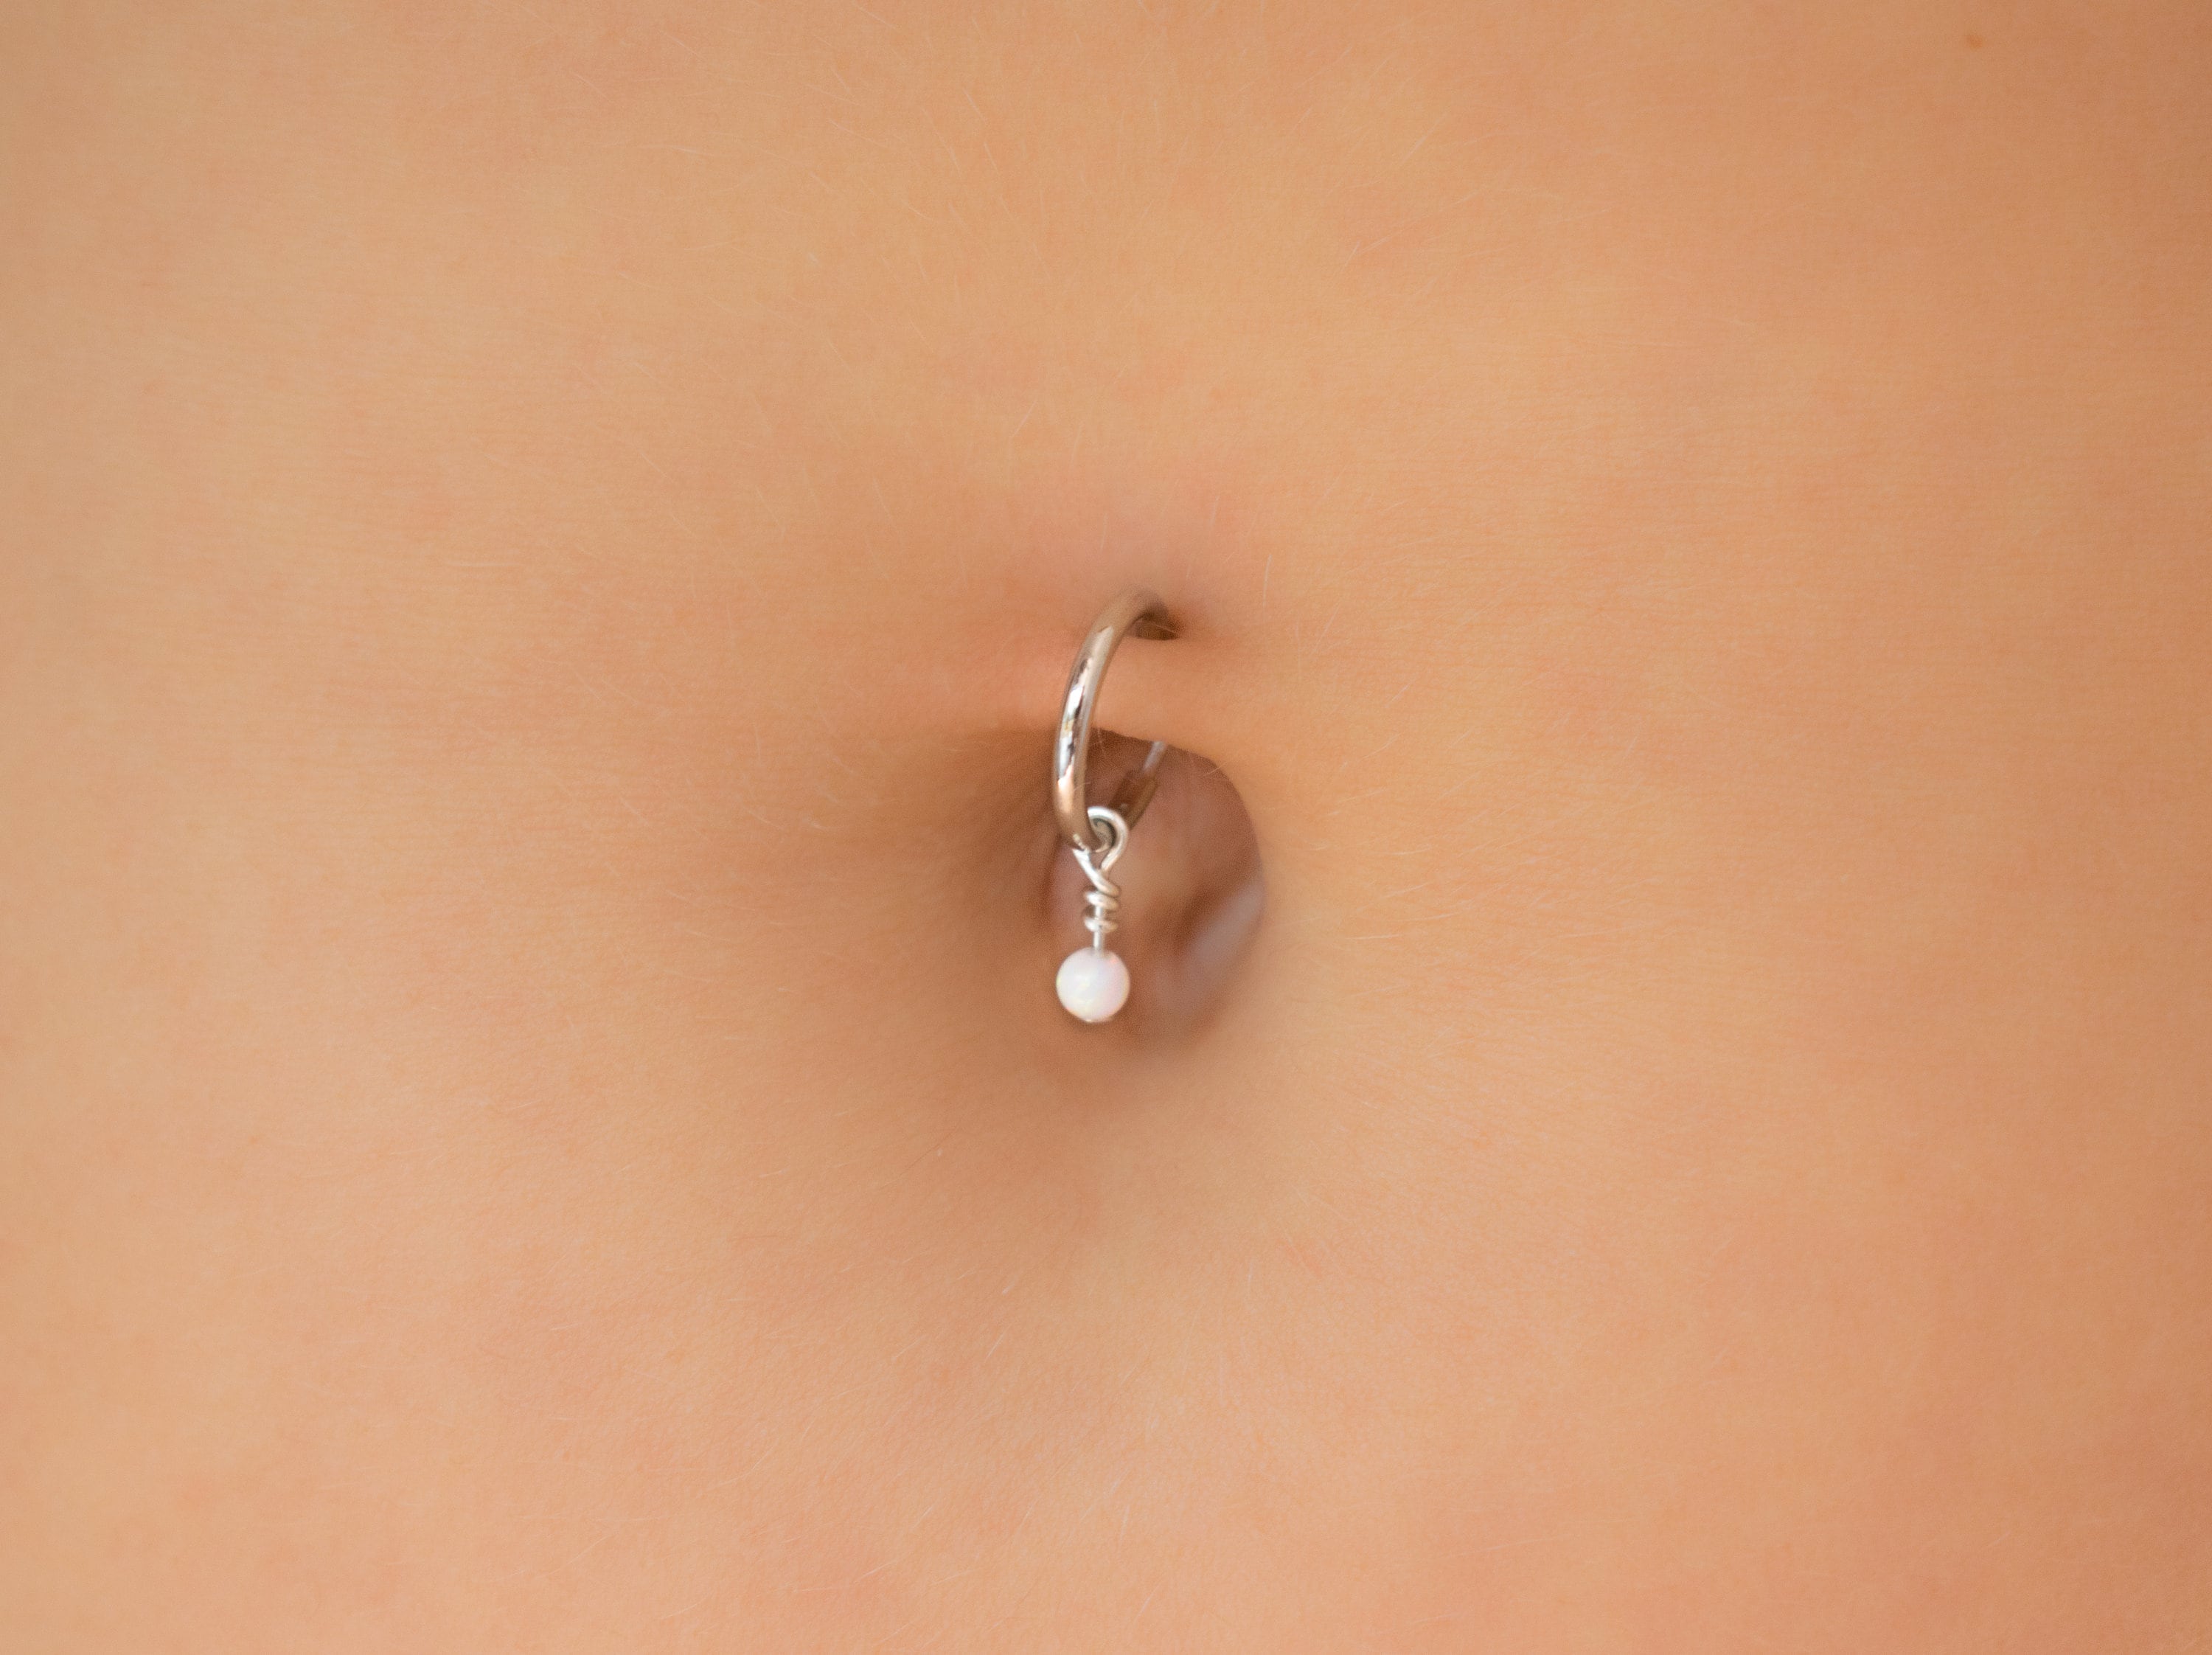 Fake Piercing Attractive Nice Dance Navel Belly Button Rings Umbilical Nail  Body | Wish